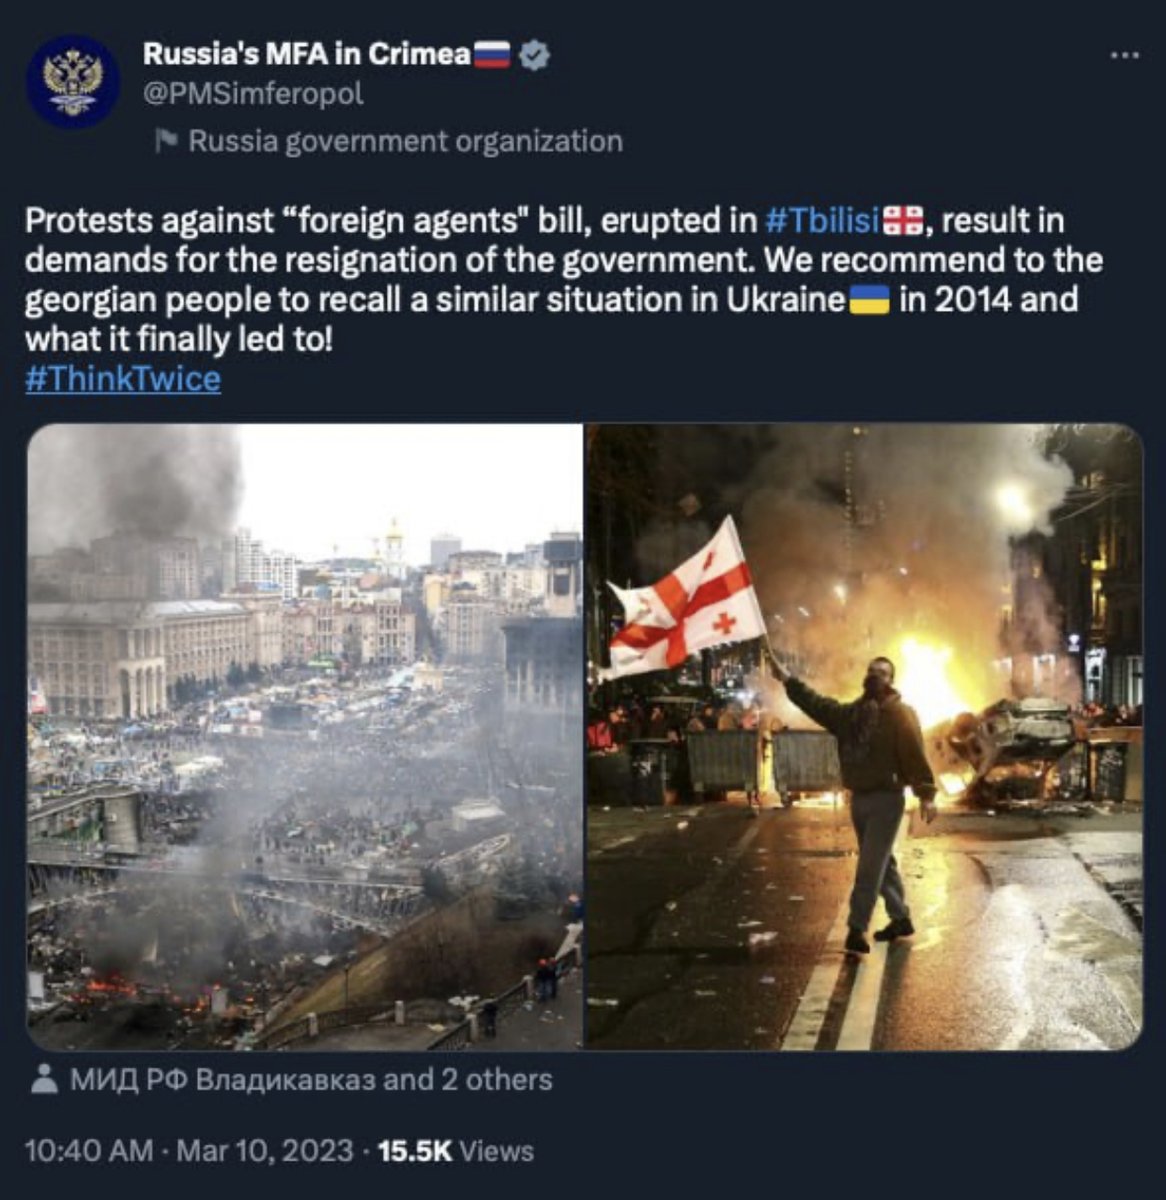 #Russia threatening #Georgia 
Protests against 'foreign agents' erupted in #Tbilisi demands for the resignation of government. We recommend to #Georgian people to recall a similar situation in #Ukraine in 2014

#RussiaIsATerroristState
#GeorgiaIsEurope #TbilisiProtests
#Anonymous